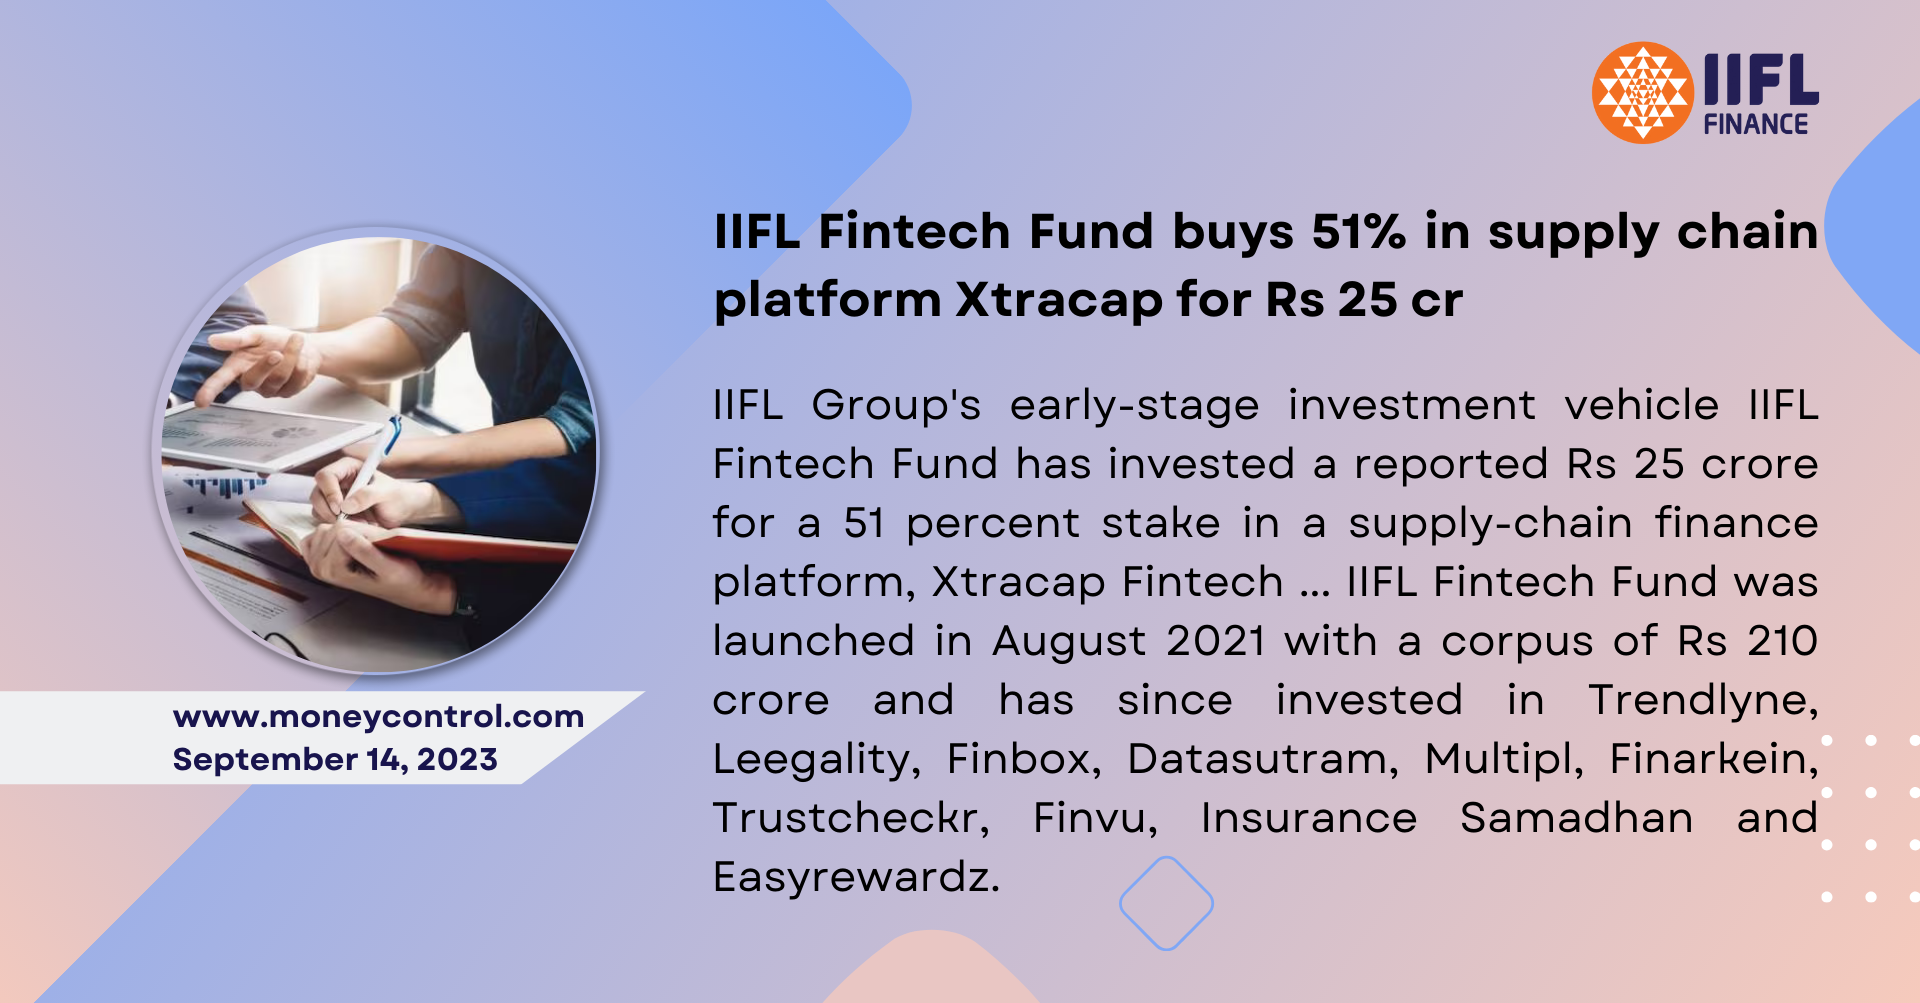 IIFL Fintech Fund buys 51% in supply chain platform Xtracap for Rs 25 cr